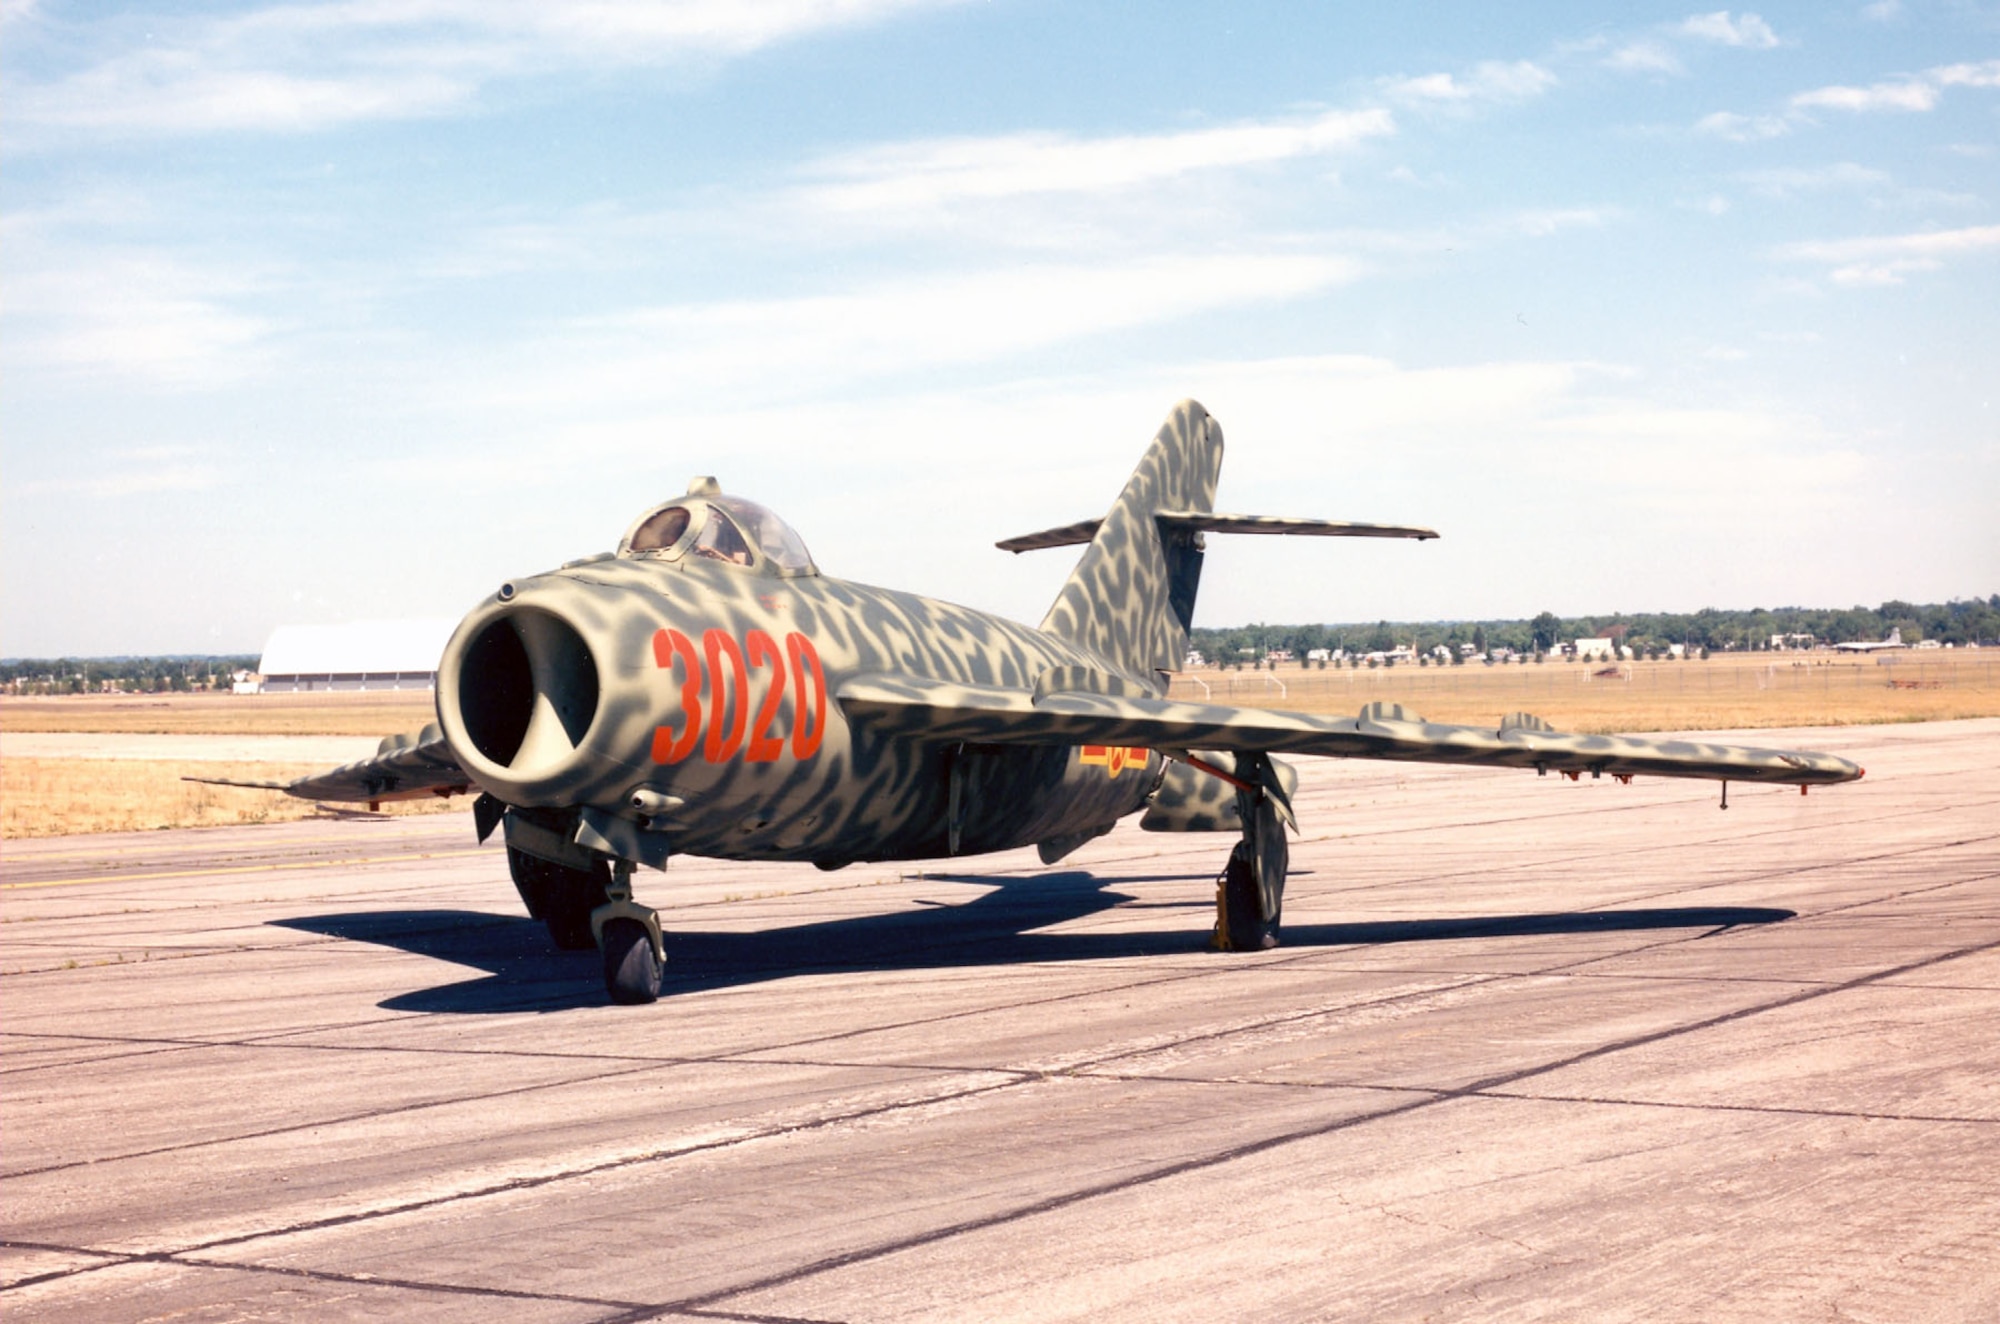 DAYTON, Ohio -- Mikoyan-Gurevich MiG-17F at the National Museum of the United States Air Force. (U.S. Air Force photo)